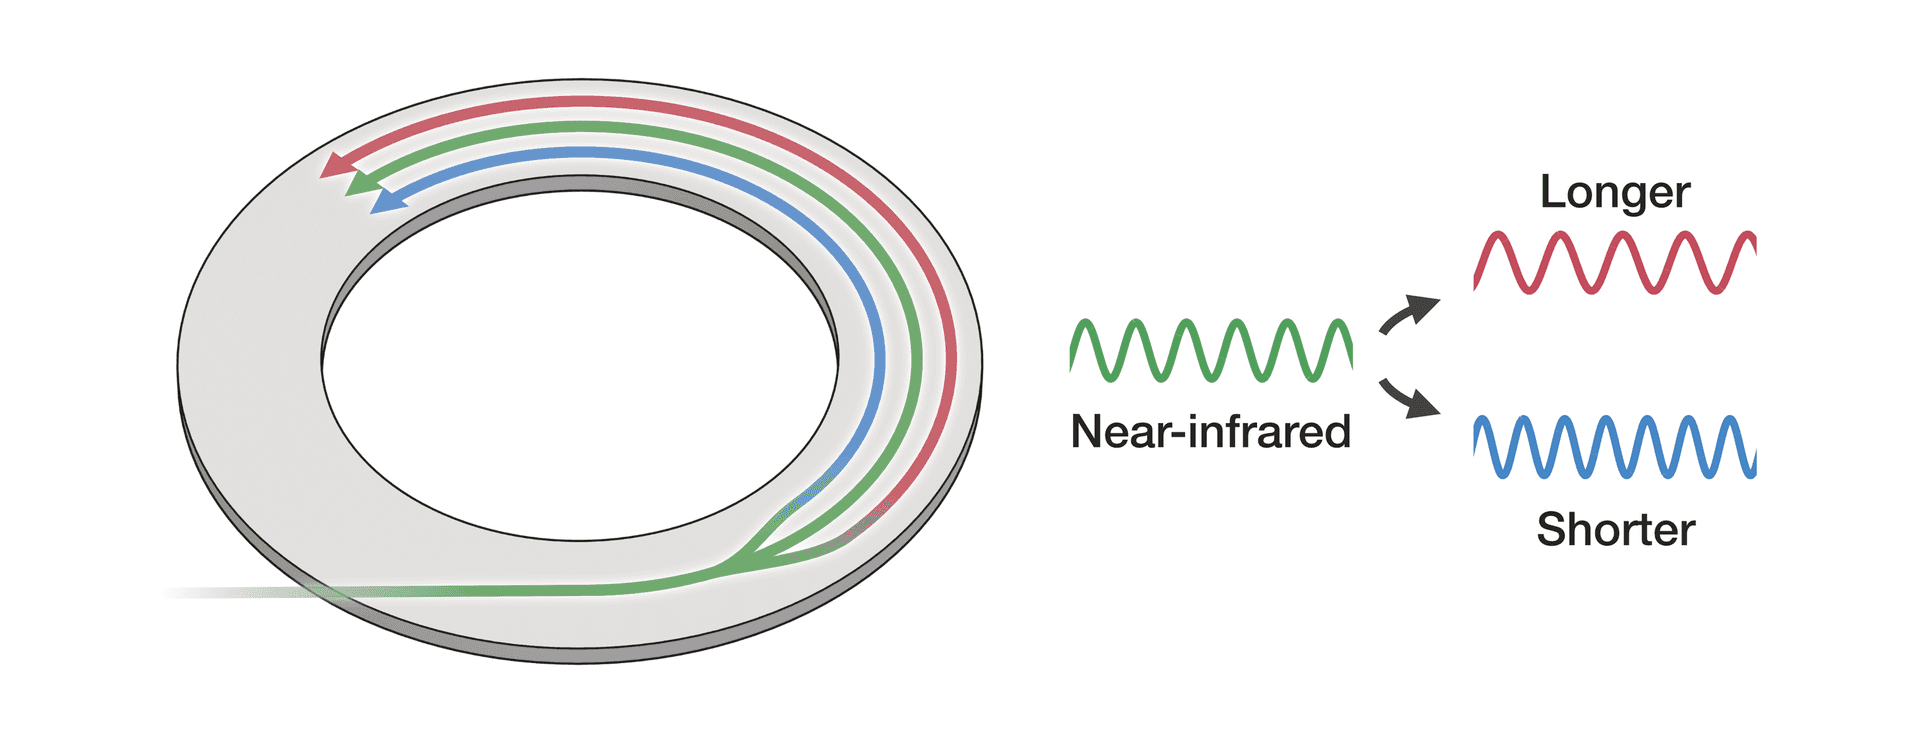 A green line branches into a blue, a green and a red line inside of a flat ring.